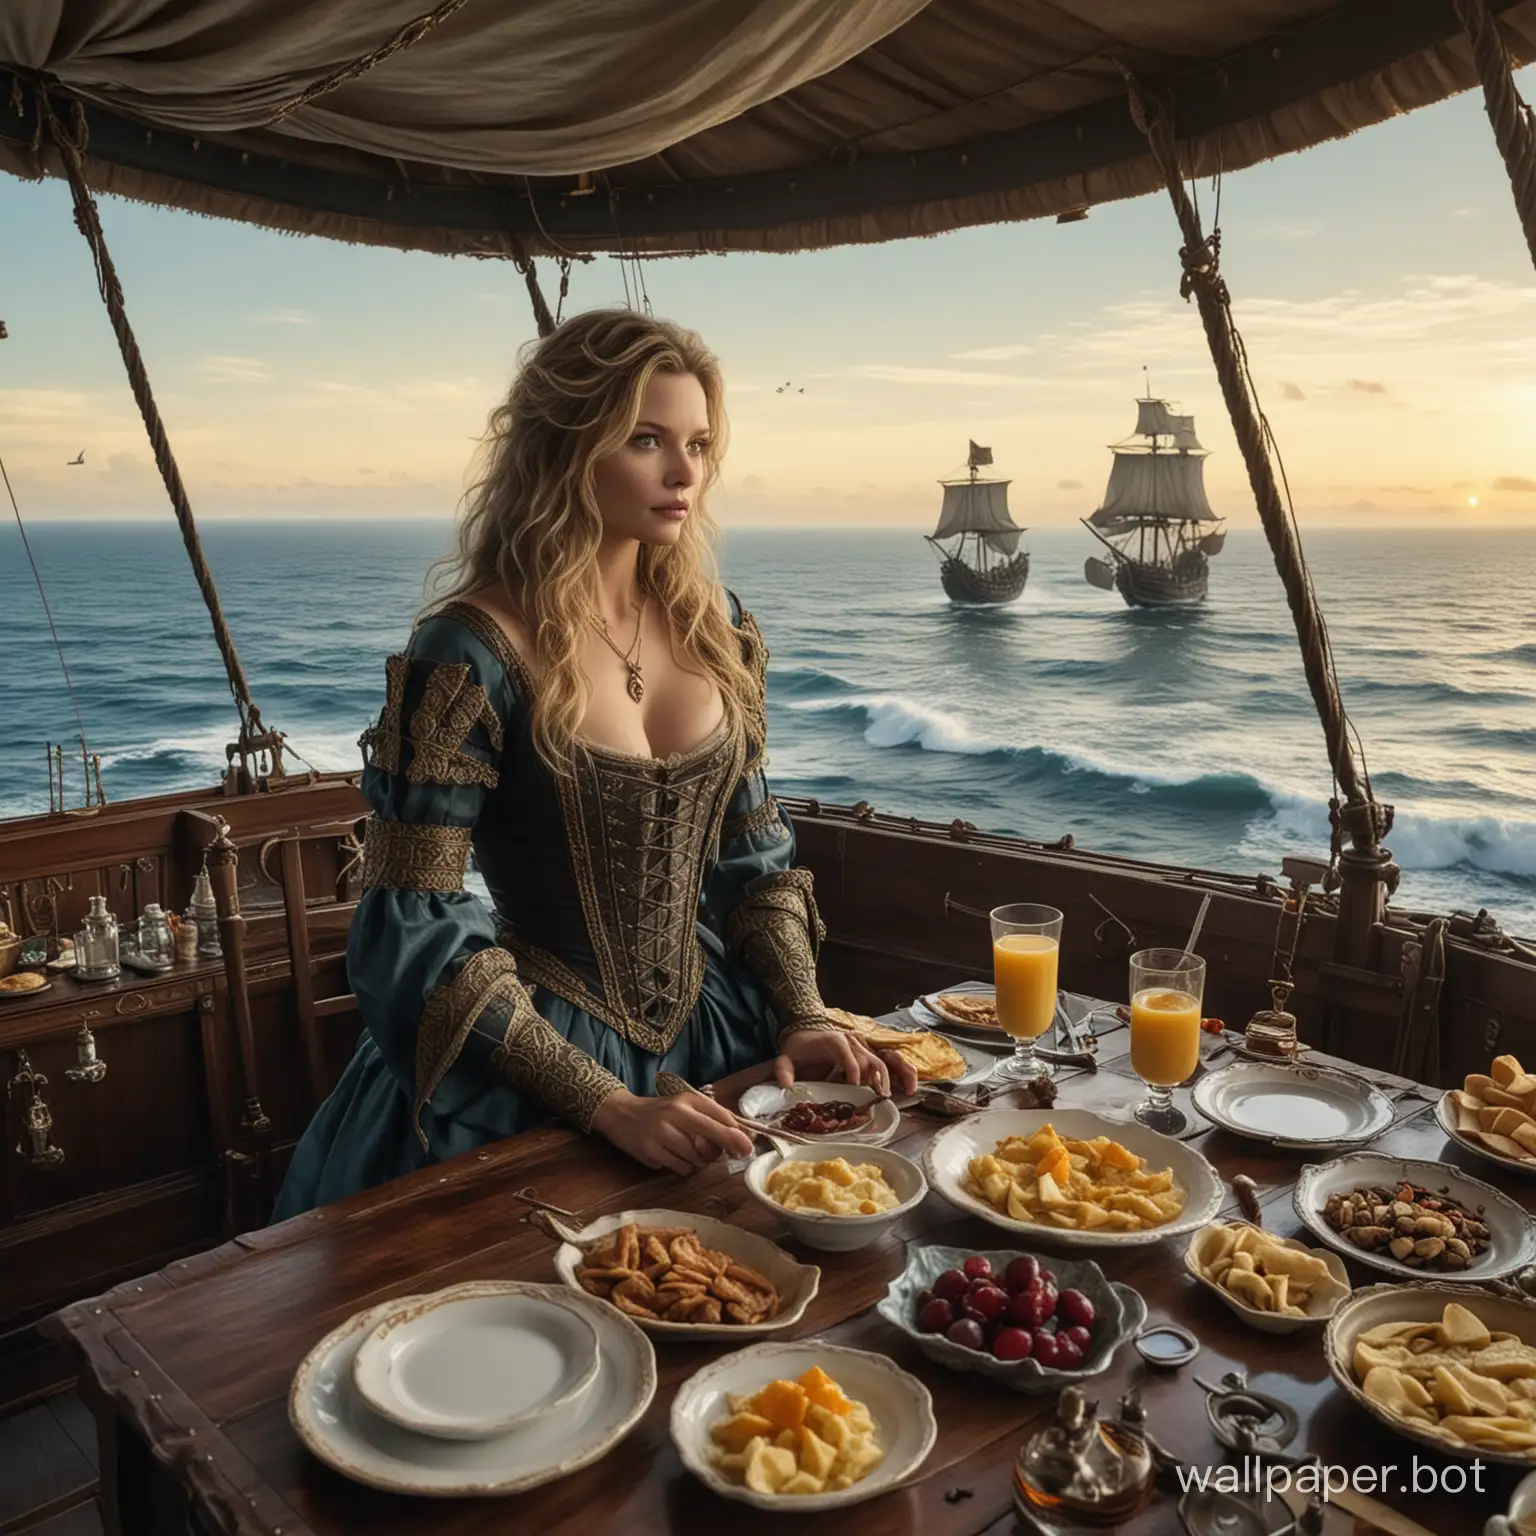 View from the upper deck of a fantasy airship. Below is an endless ocean with medieval sailing ships. Young Michelle Pfeiffer, dressed in a fantasy erotic costume of a fantasy warrior with a deep neckline, is having breakfast at the table.